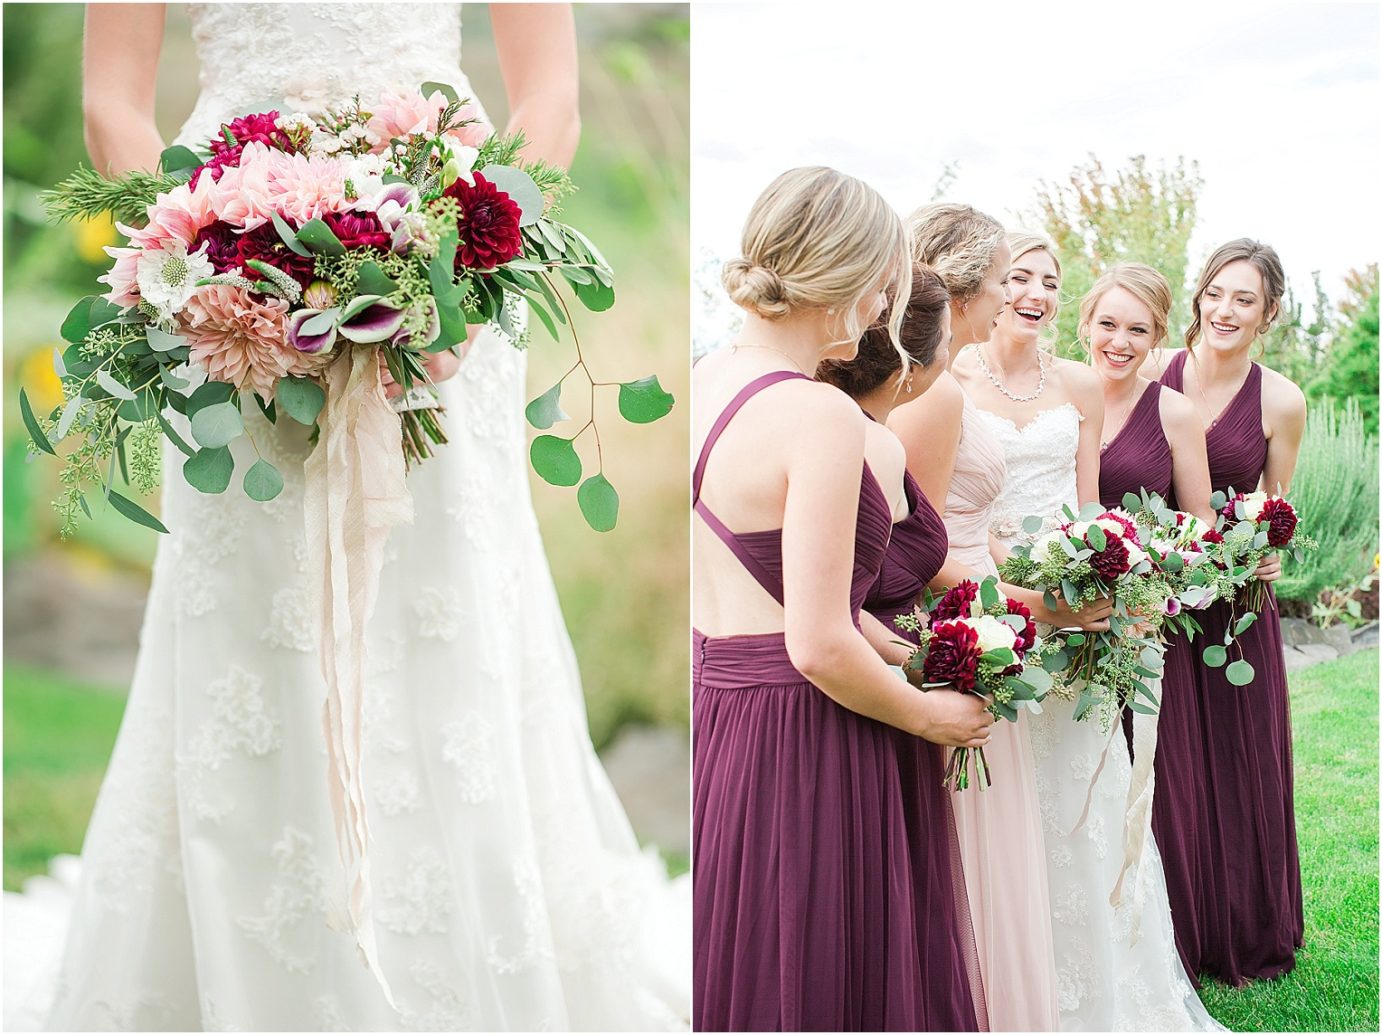 Favorite wedding flowers of 2017 For brides maroon and peach wedding flowers